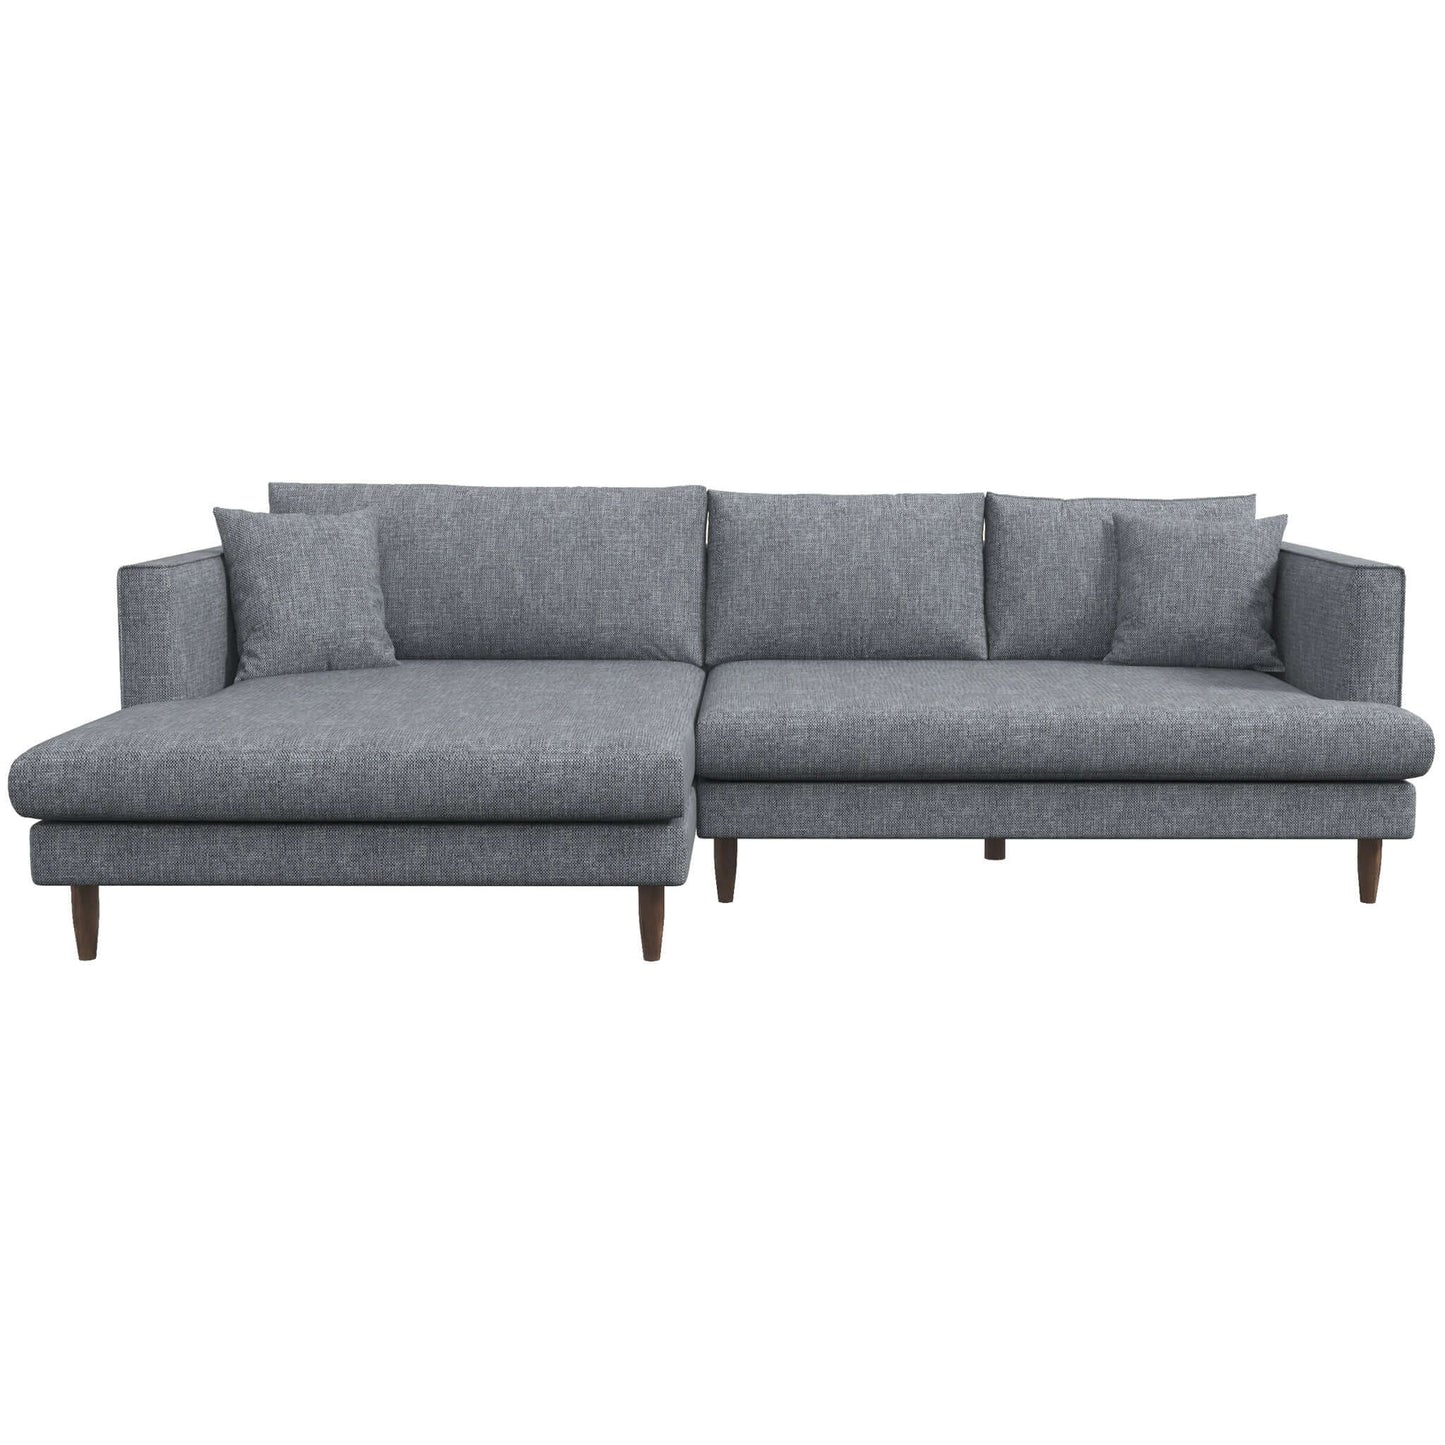 Ashcroft Furniture Co Sectional Sofas Grey Linen / Left Facing Blake L-Shaped Sectional Sofa